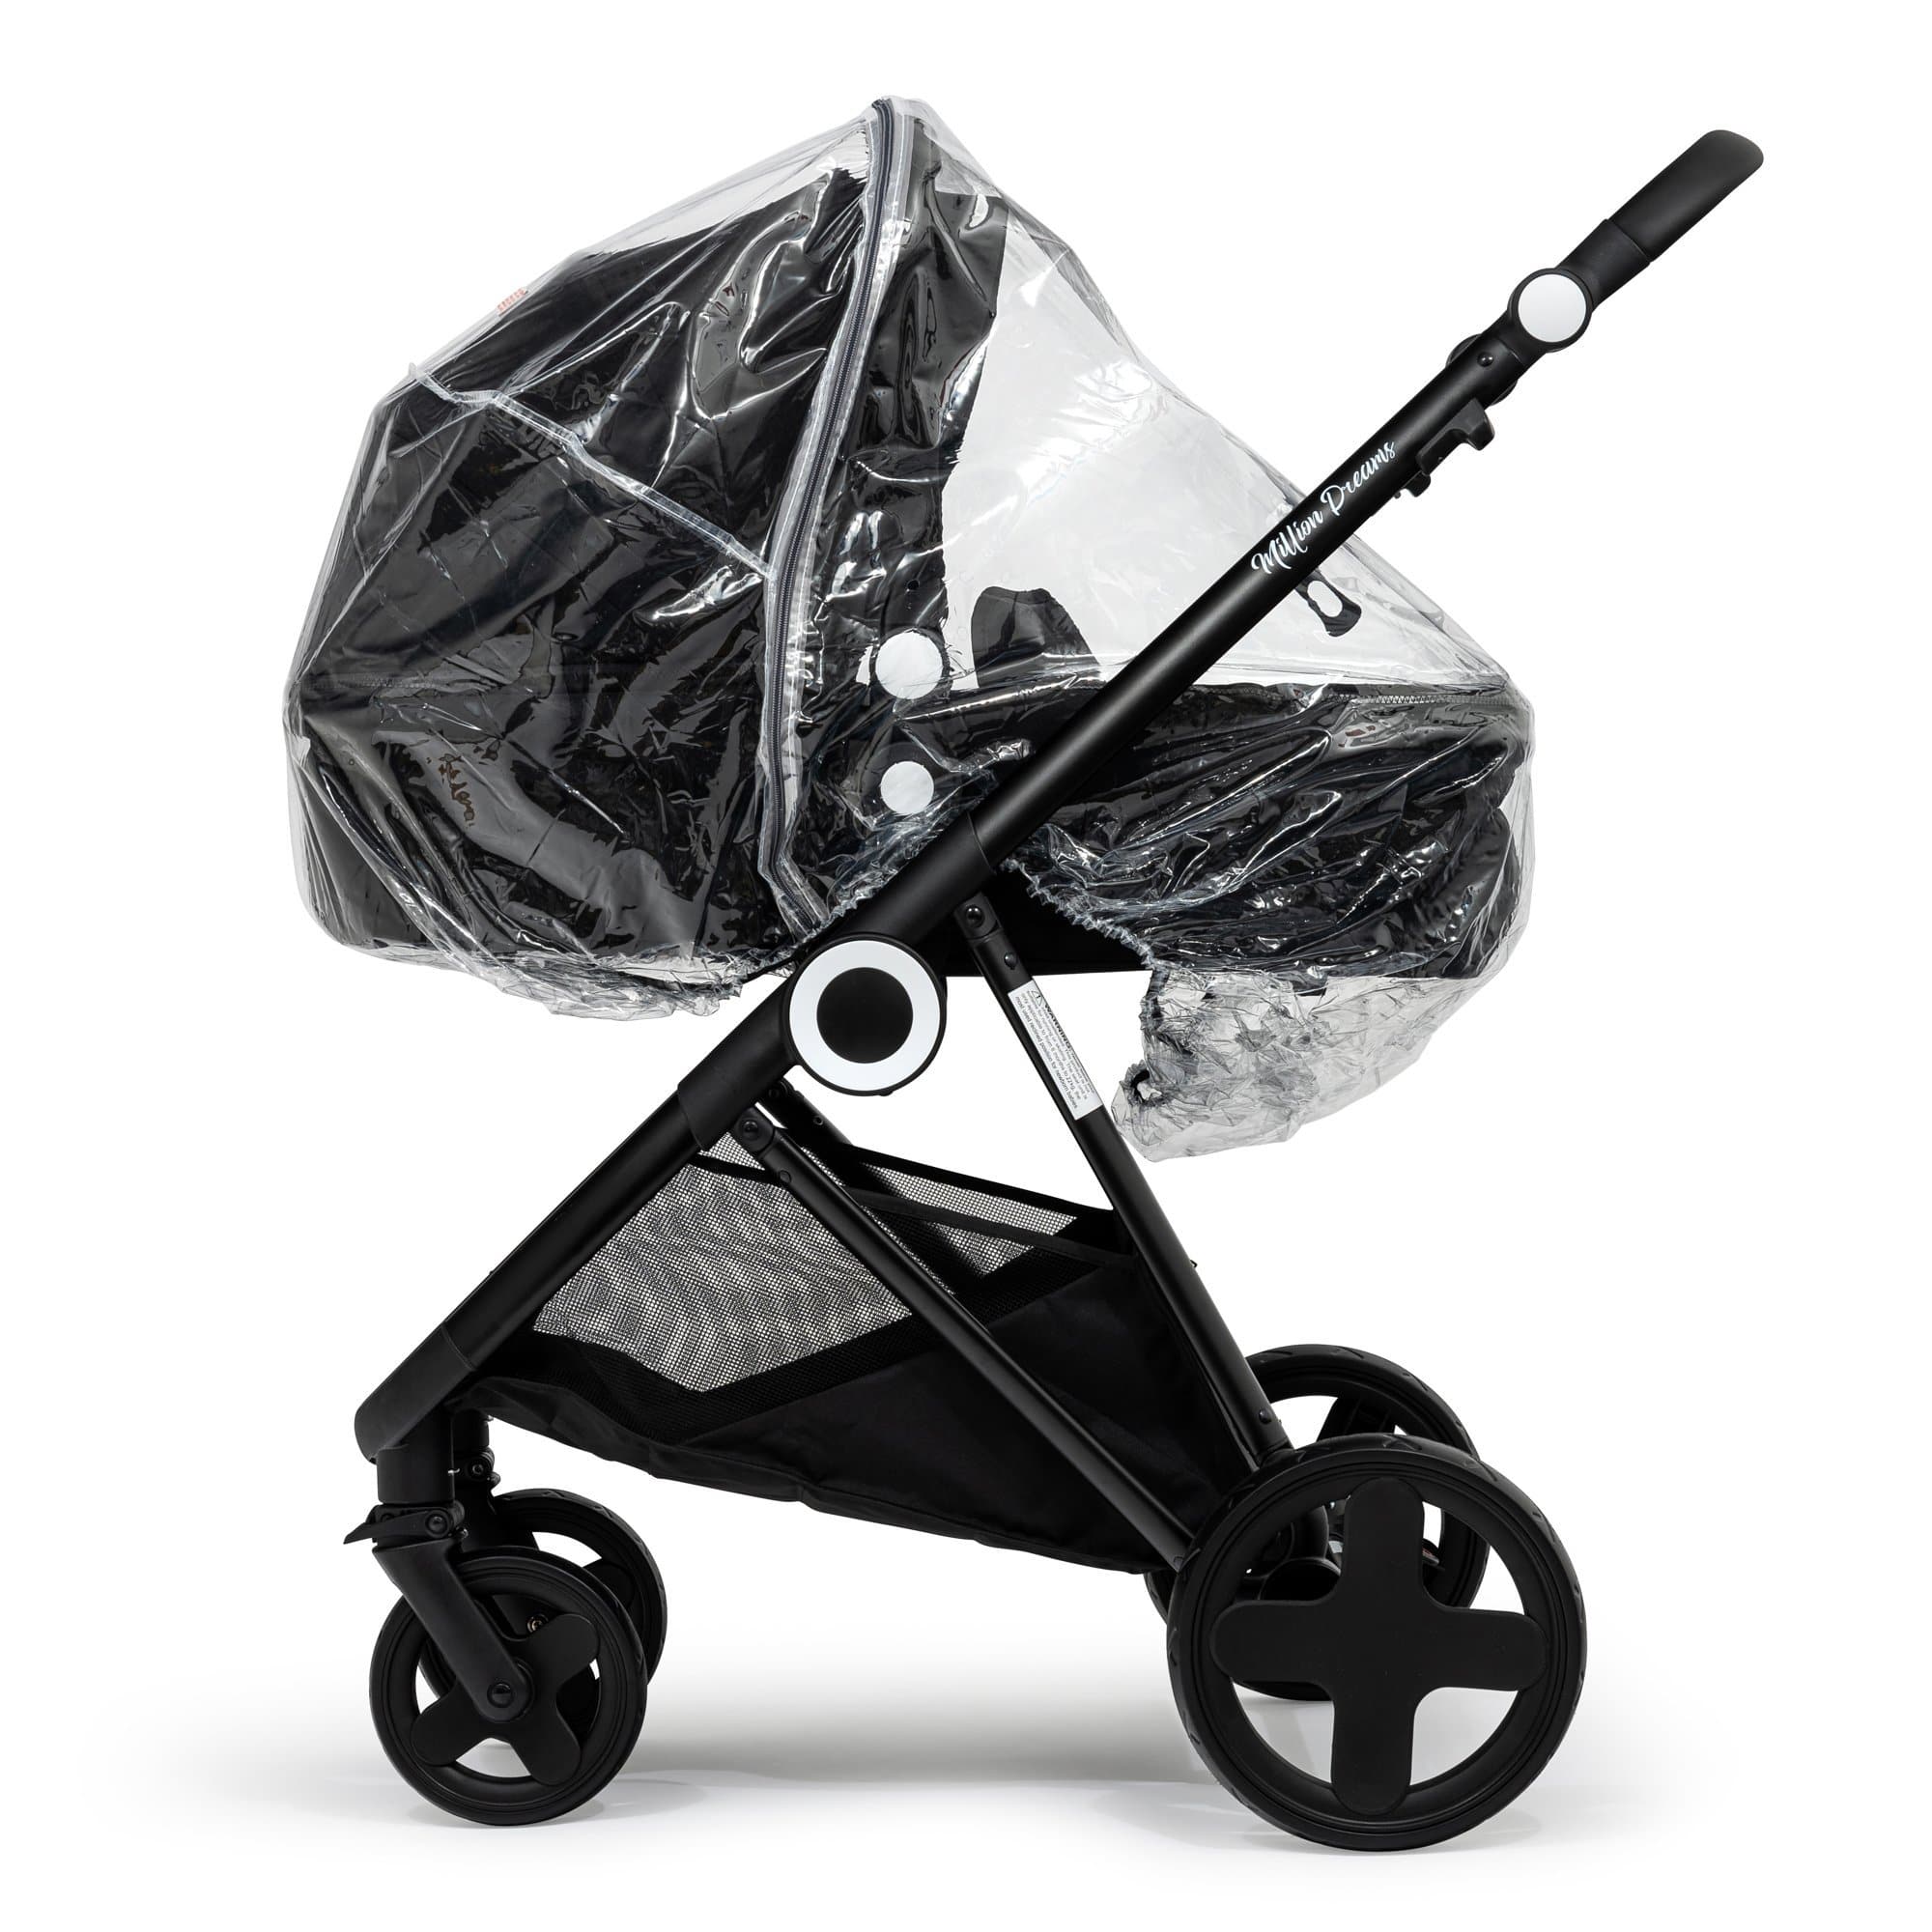 2 in 1 Rain Cover Compatible with Silver Cross - Fits All Models - For Your Little One